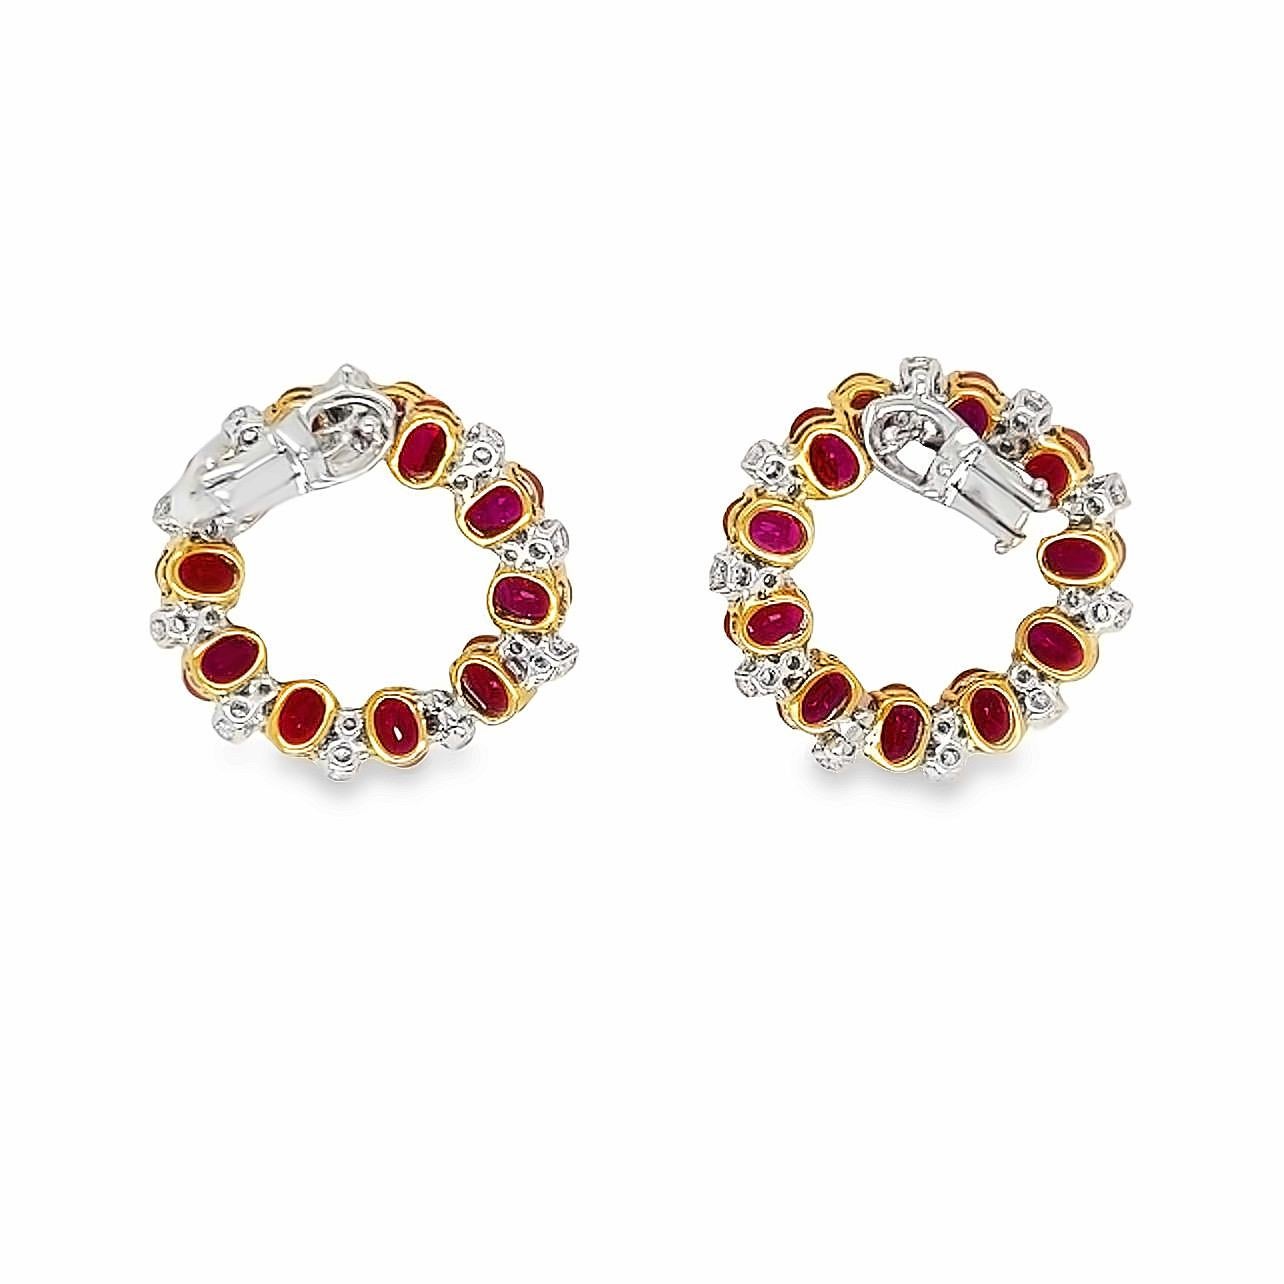 This 18K white gold elegant drop earrings are from our Timeless collection. These stud earrings are made of natural white diamonds in total of 2.13 Carat and natural oval red rubies in total of 13.07 Carat. Total metal weight is 13 gr. The diameter